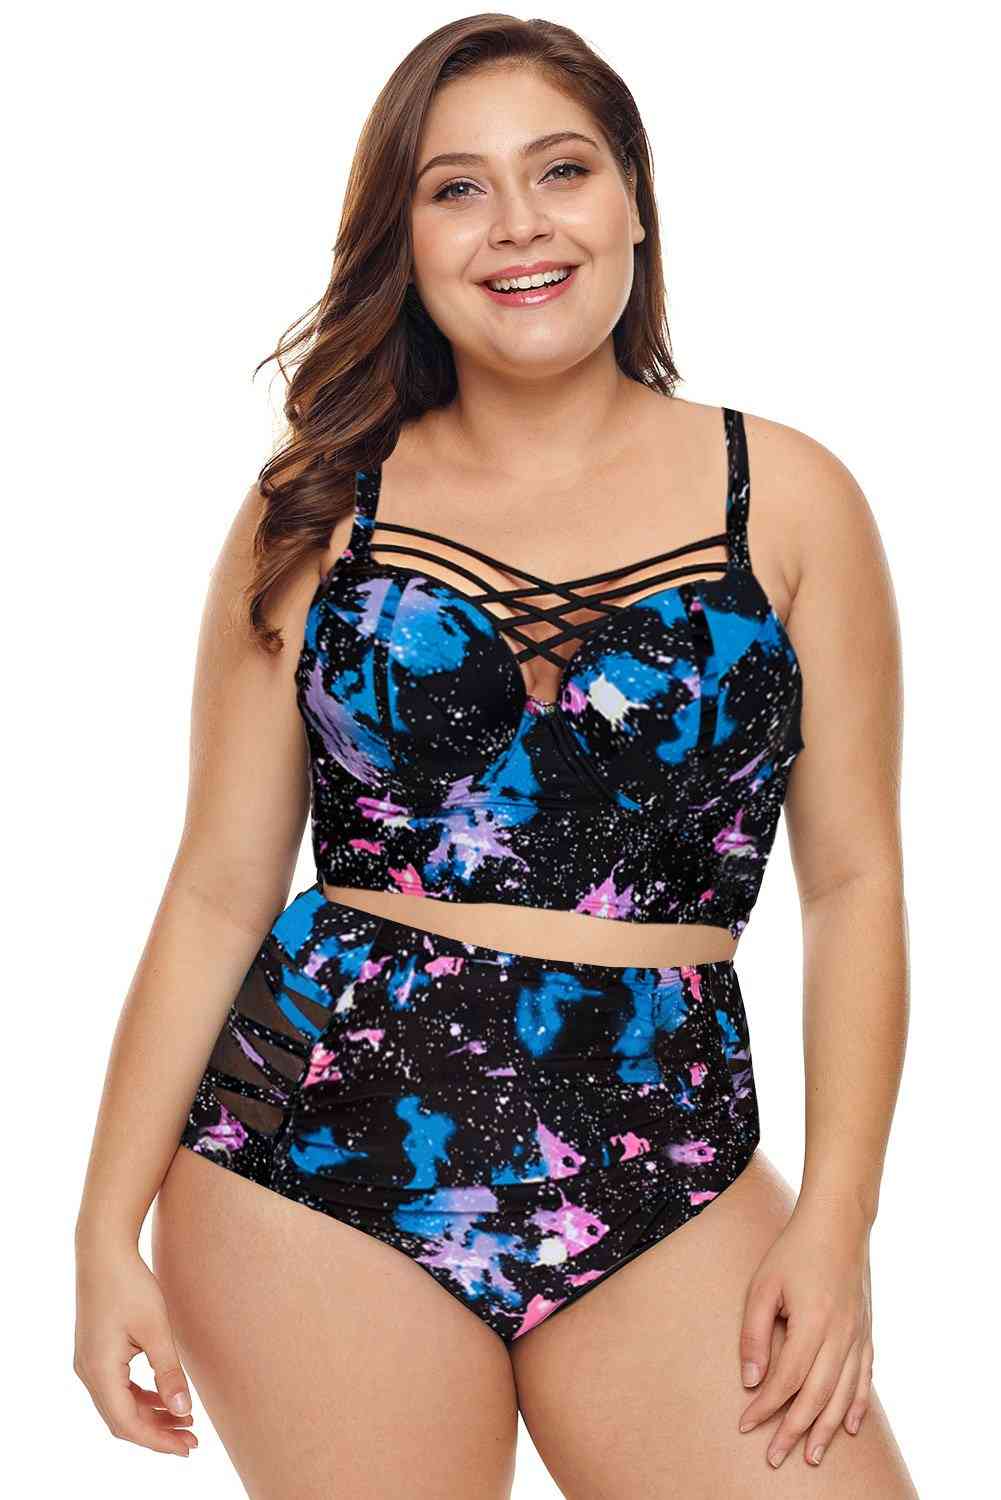 Women's High Waist Plus Size, Printed, Strappy Push Up Balconette